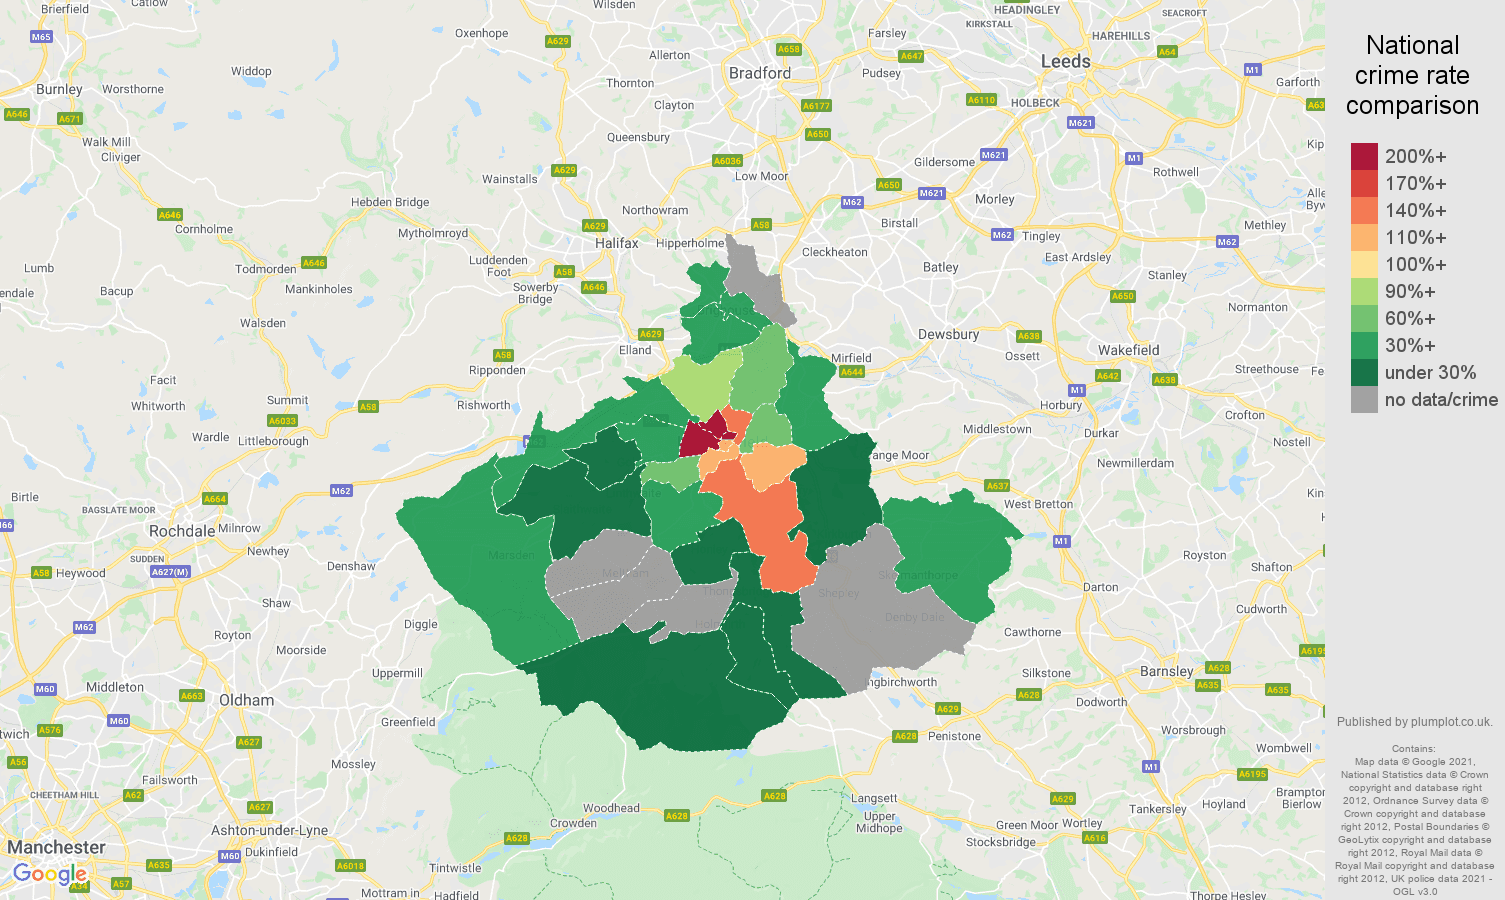 Huddersfield robbery crime rate comparison map